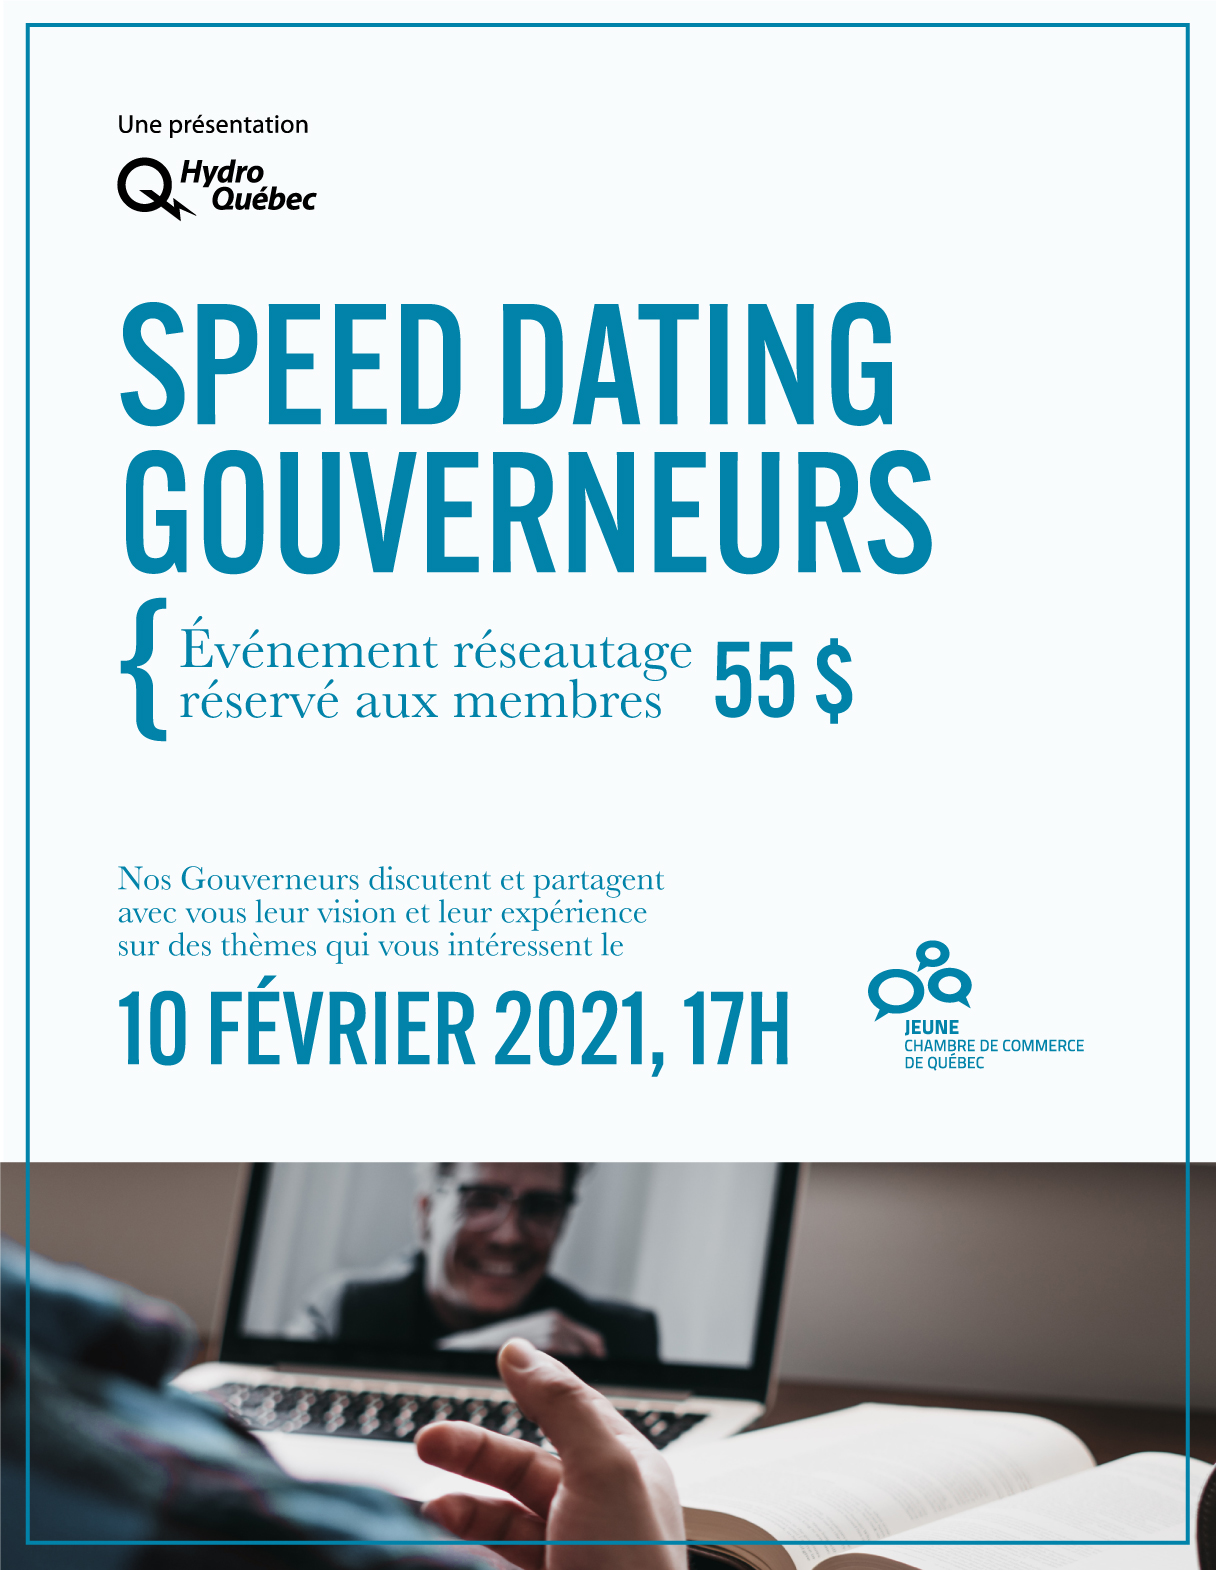 Speed dating Gouverneurs